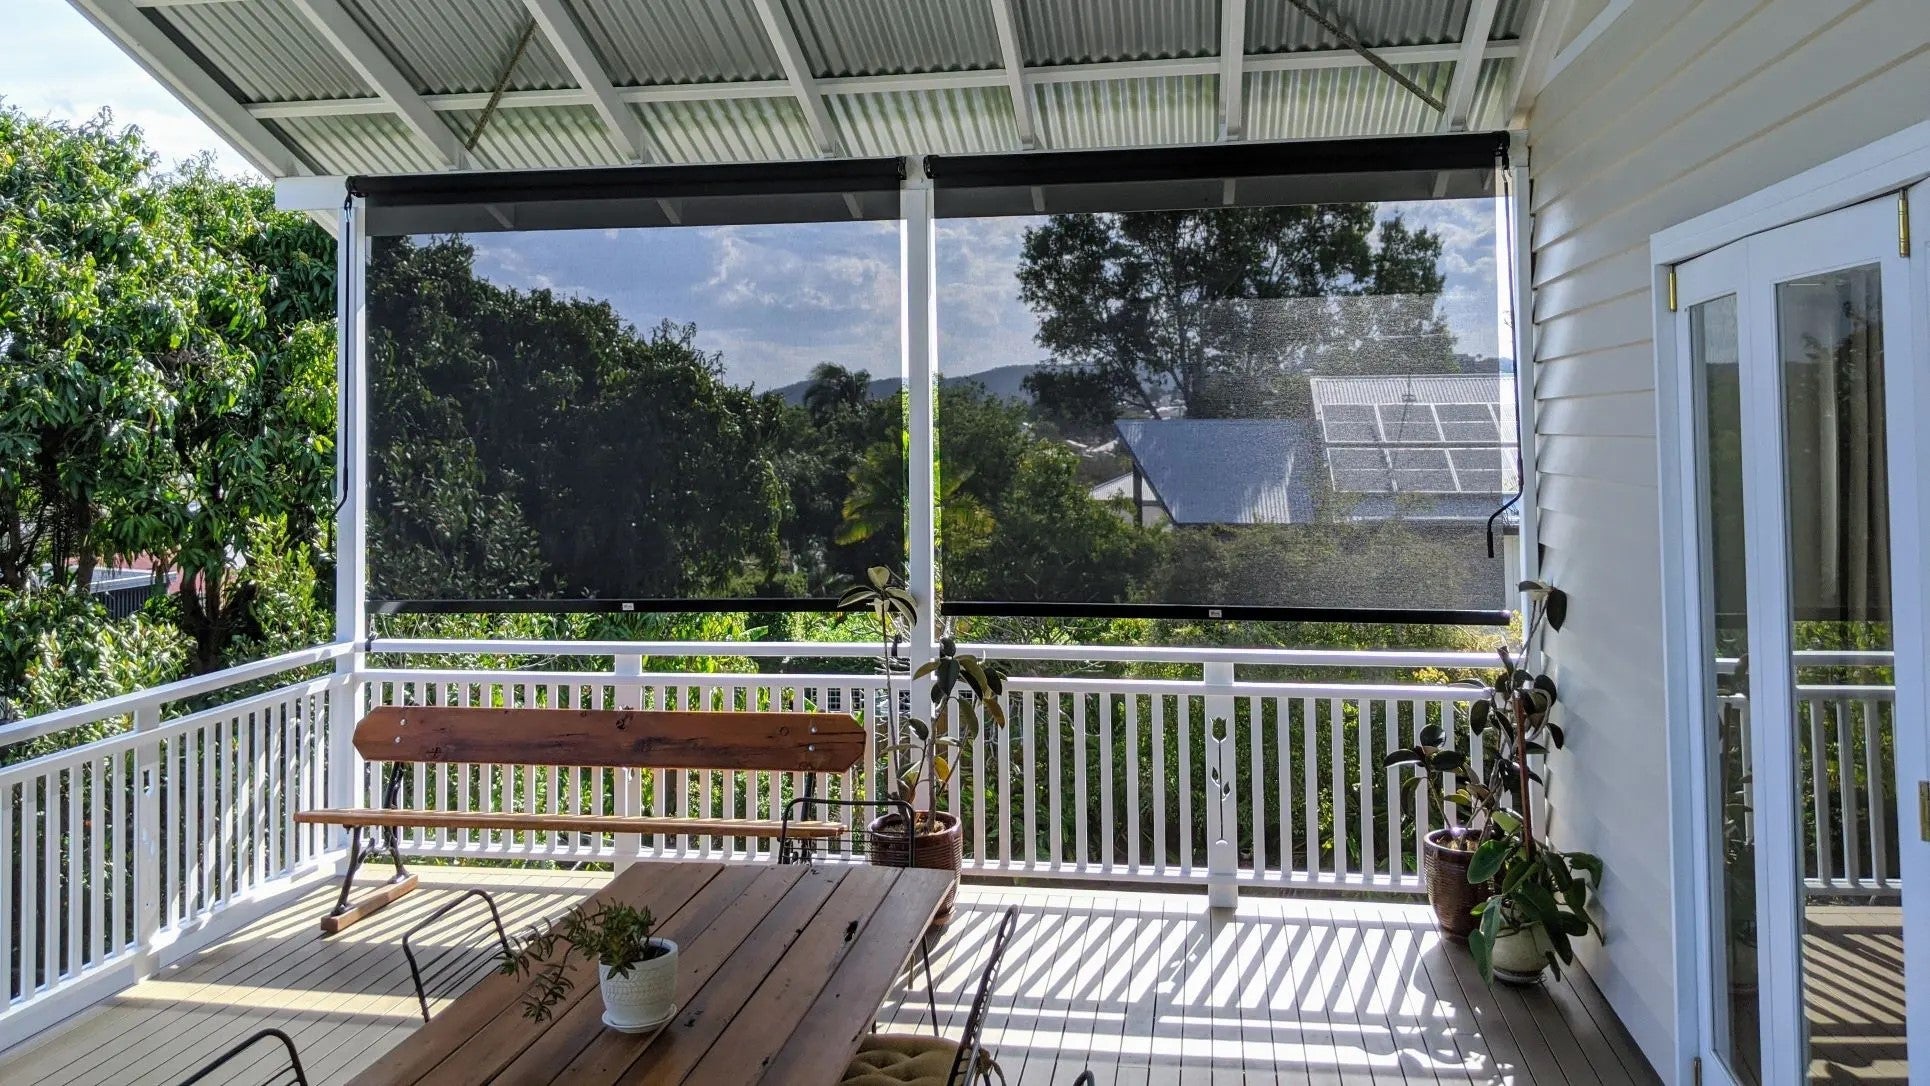 Stylish outdoor blinds providing shade and privacy